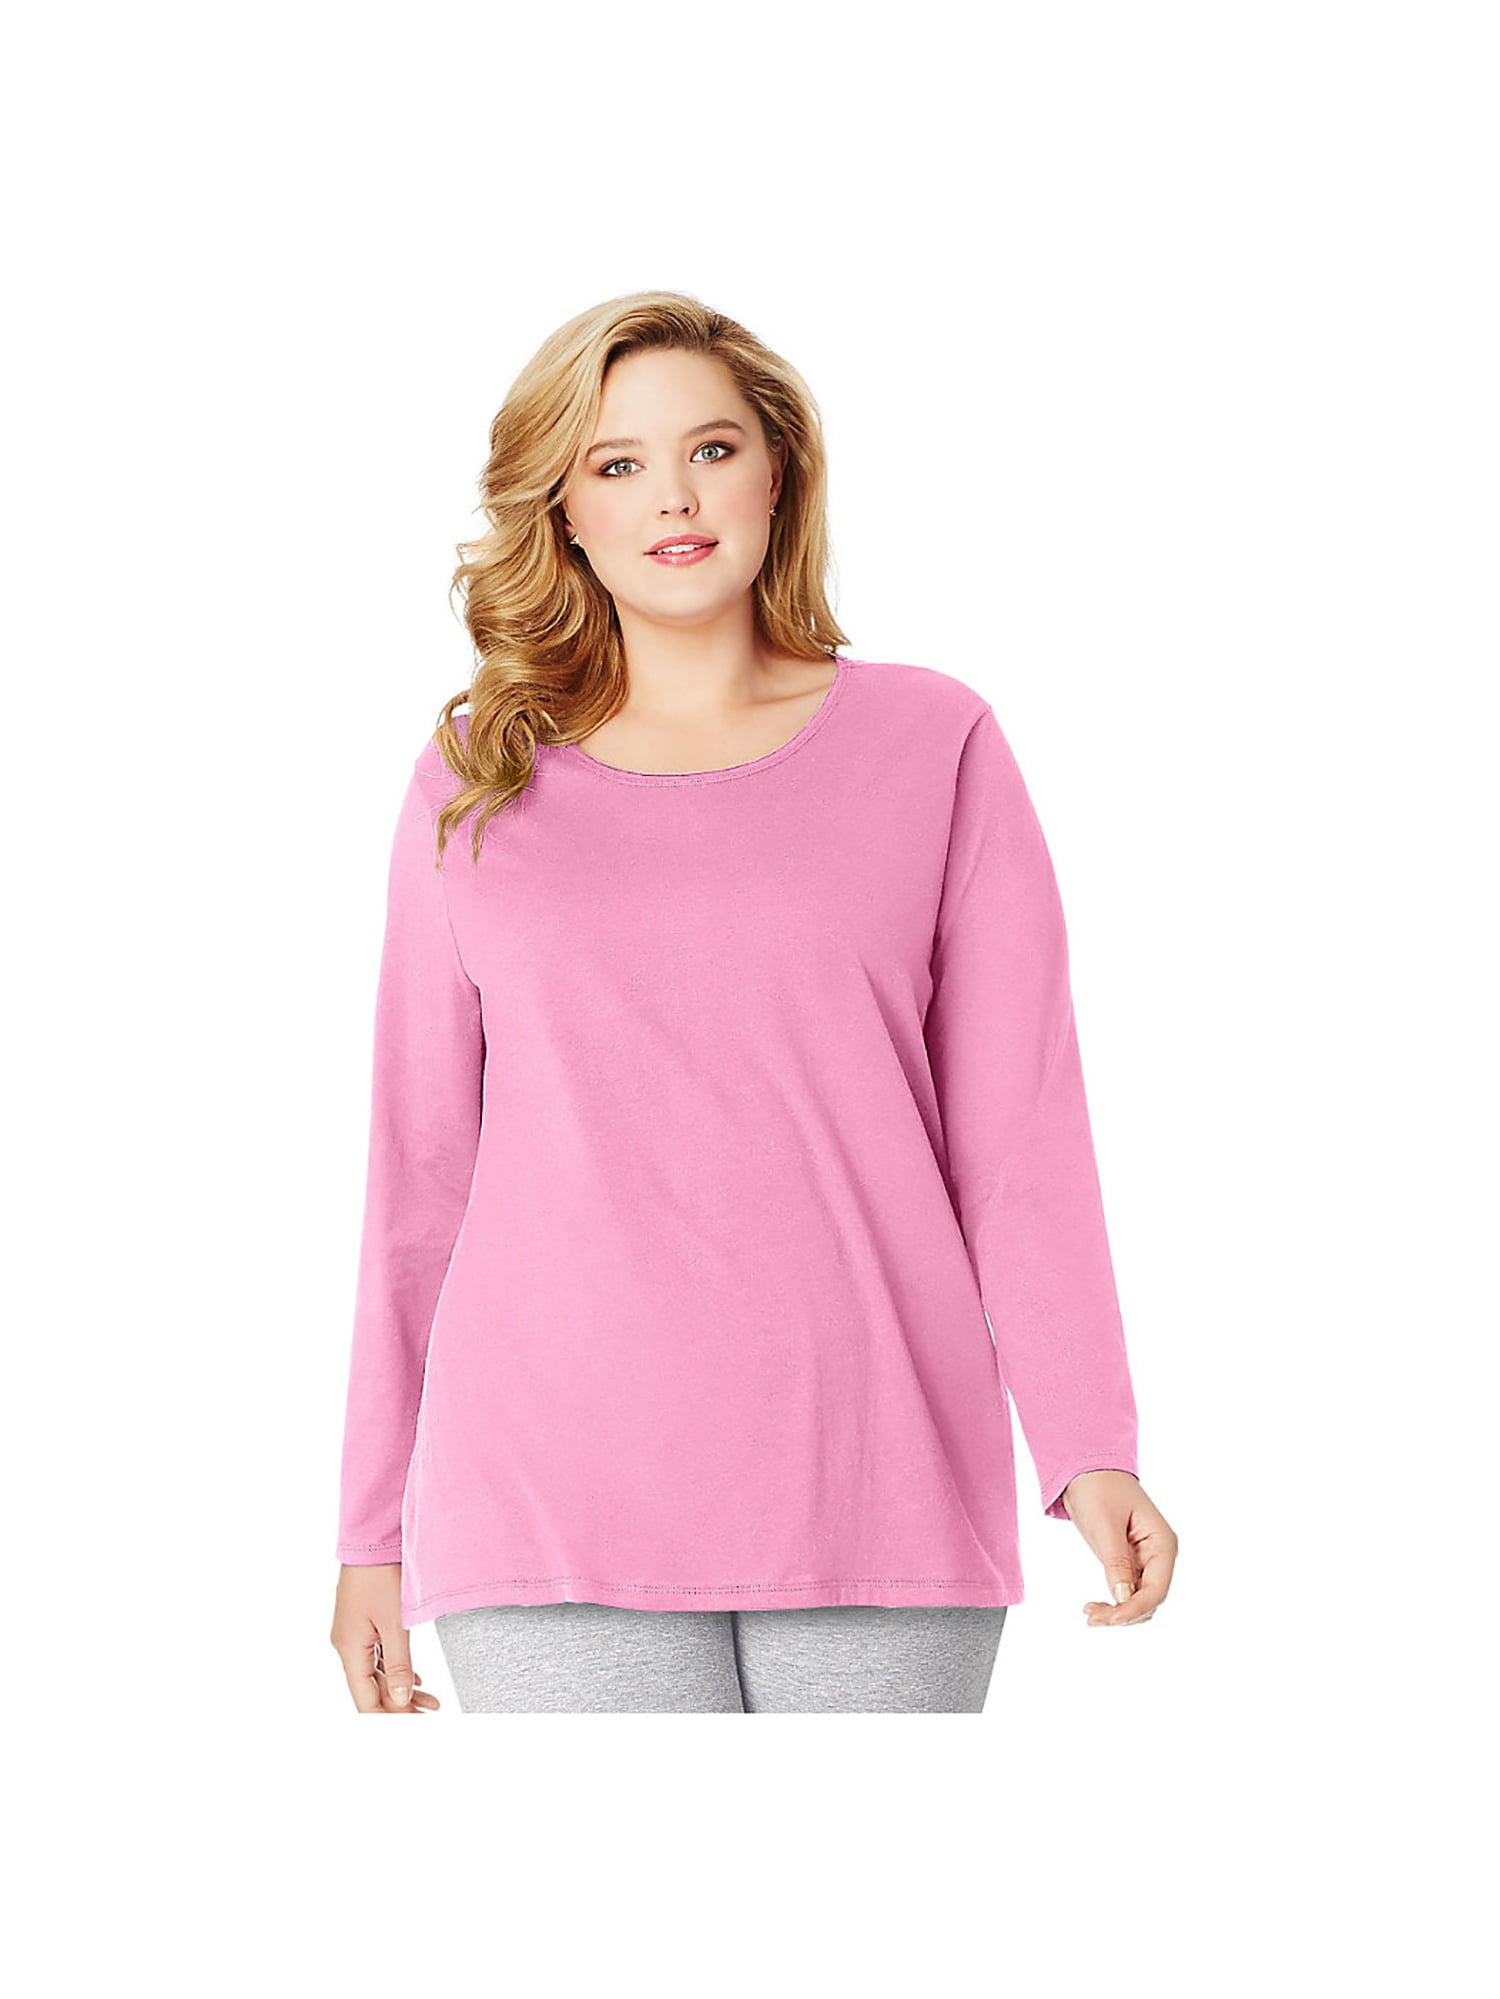 Just My Size - Just My Size Women's Long-Sleeve Scoop-Neck 100% Cotton ...